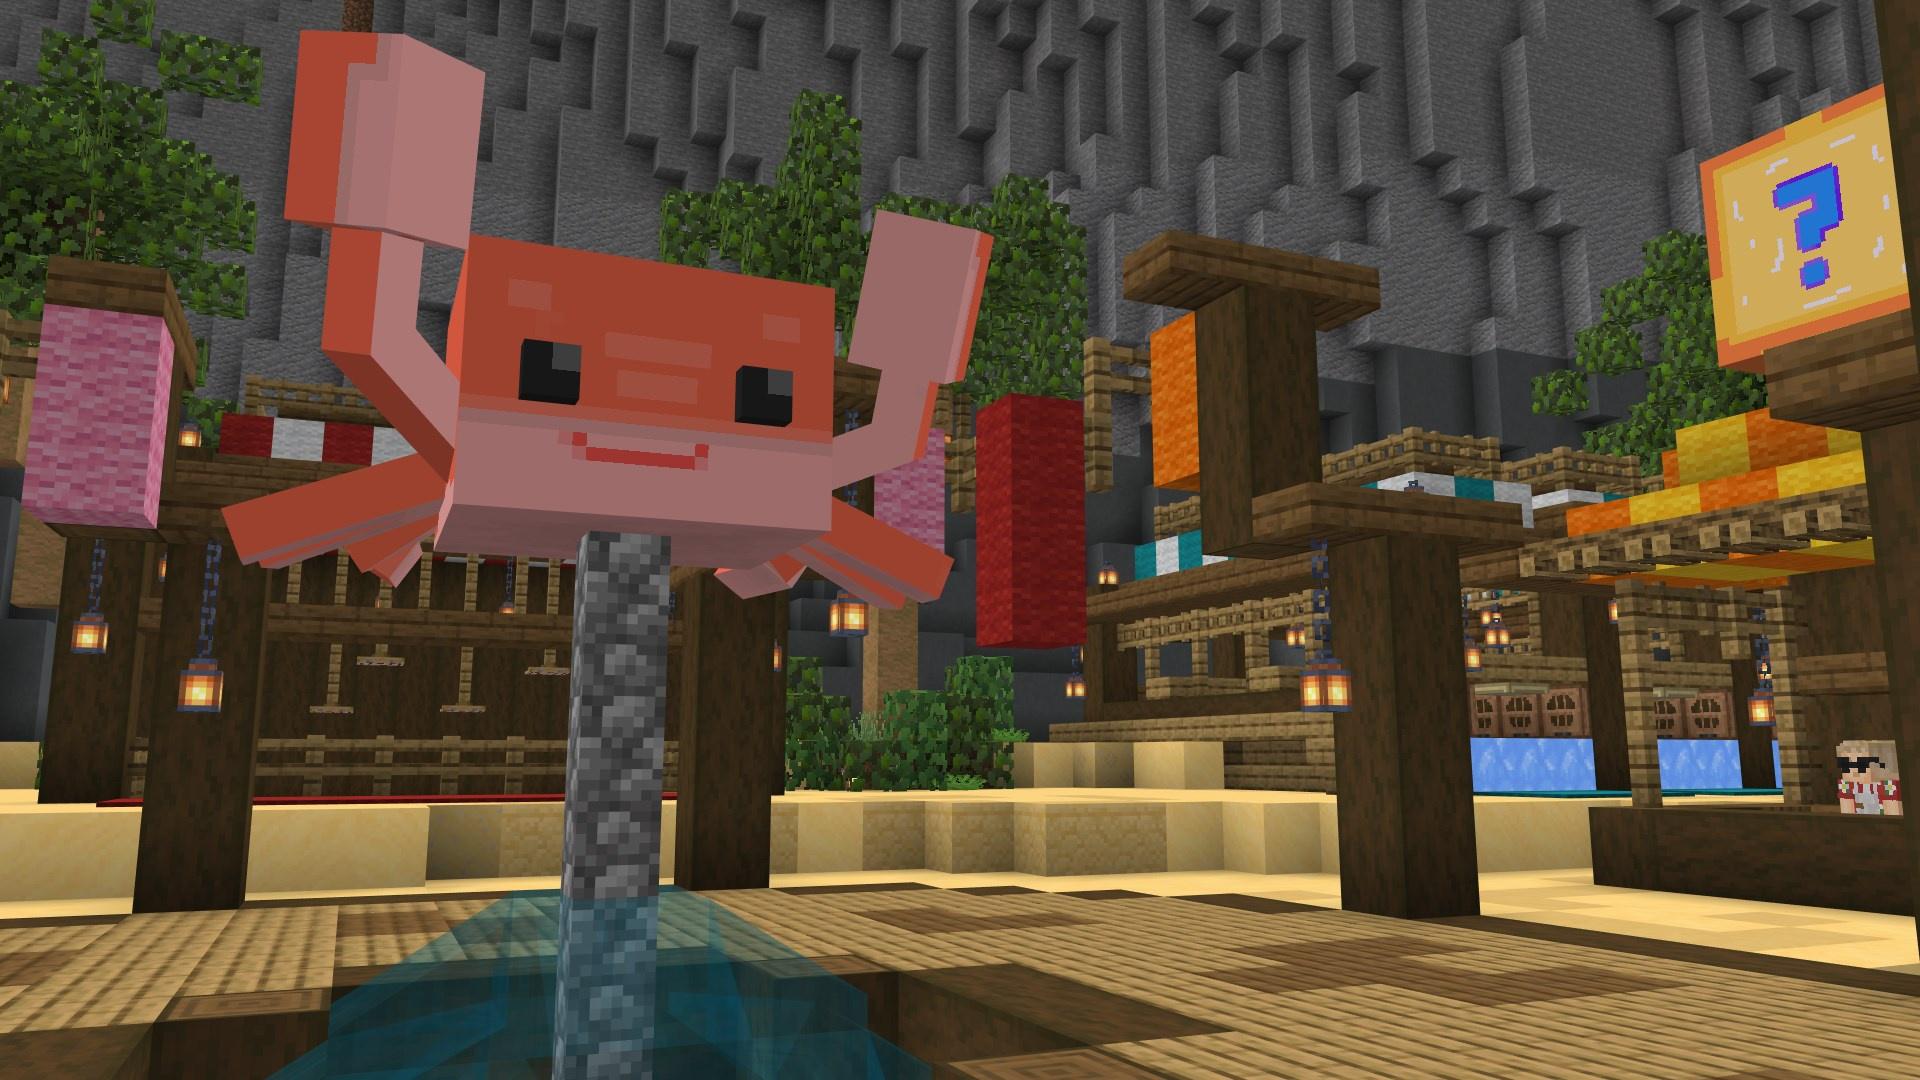 A screenshot within Minecraft of the main crab statue in Crab Cove Carnival. Some carnival games can be seen in the background, as well as a vendor stall with a box on its roof. The box has a question mark on its side.